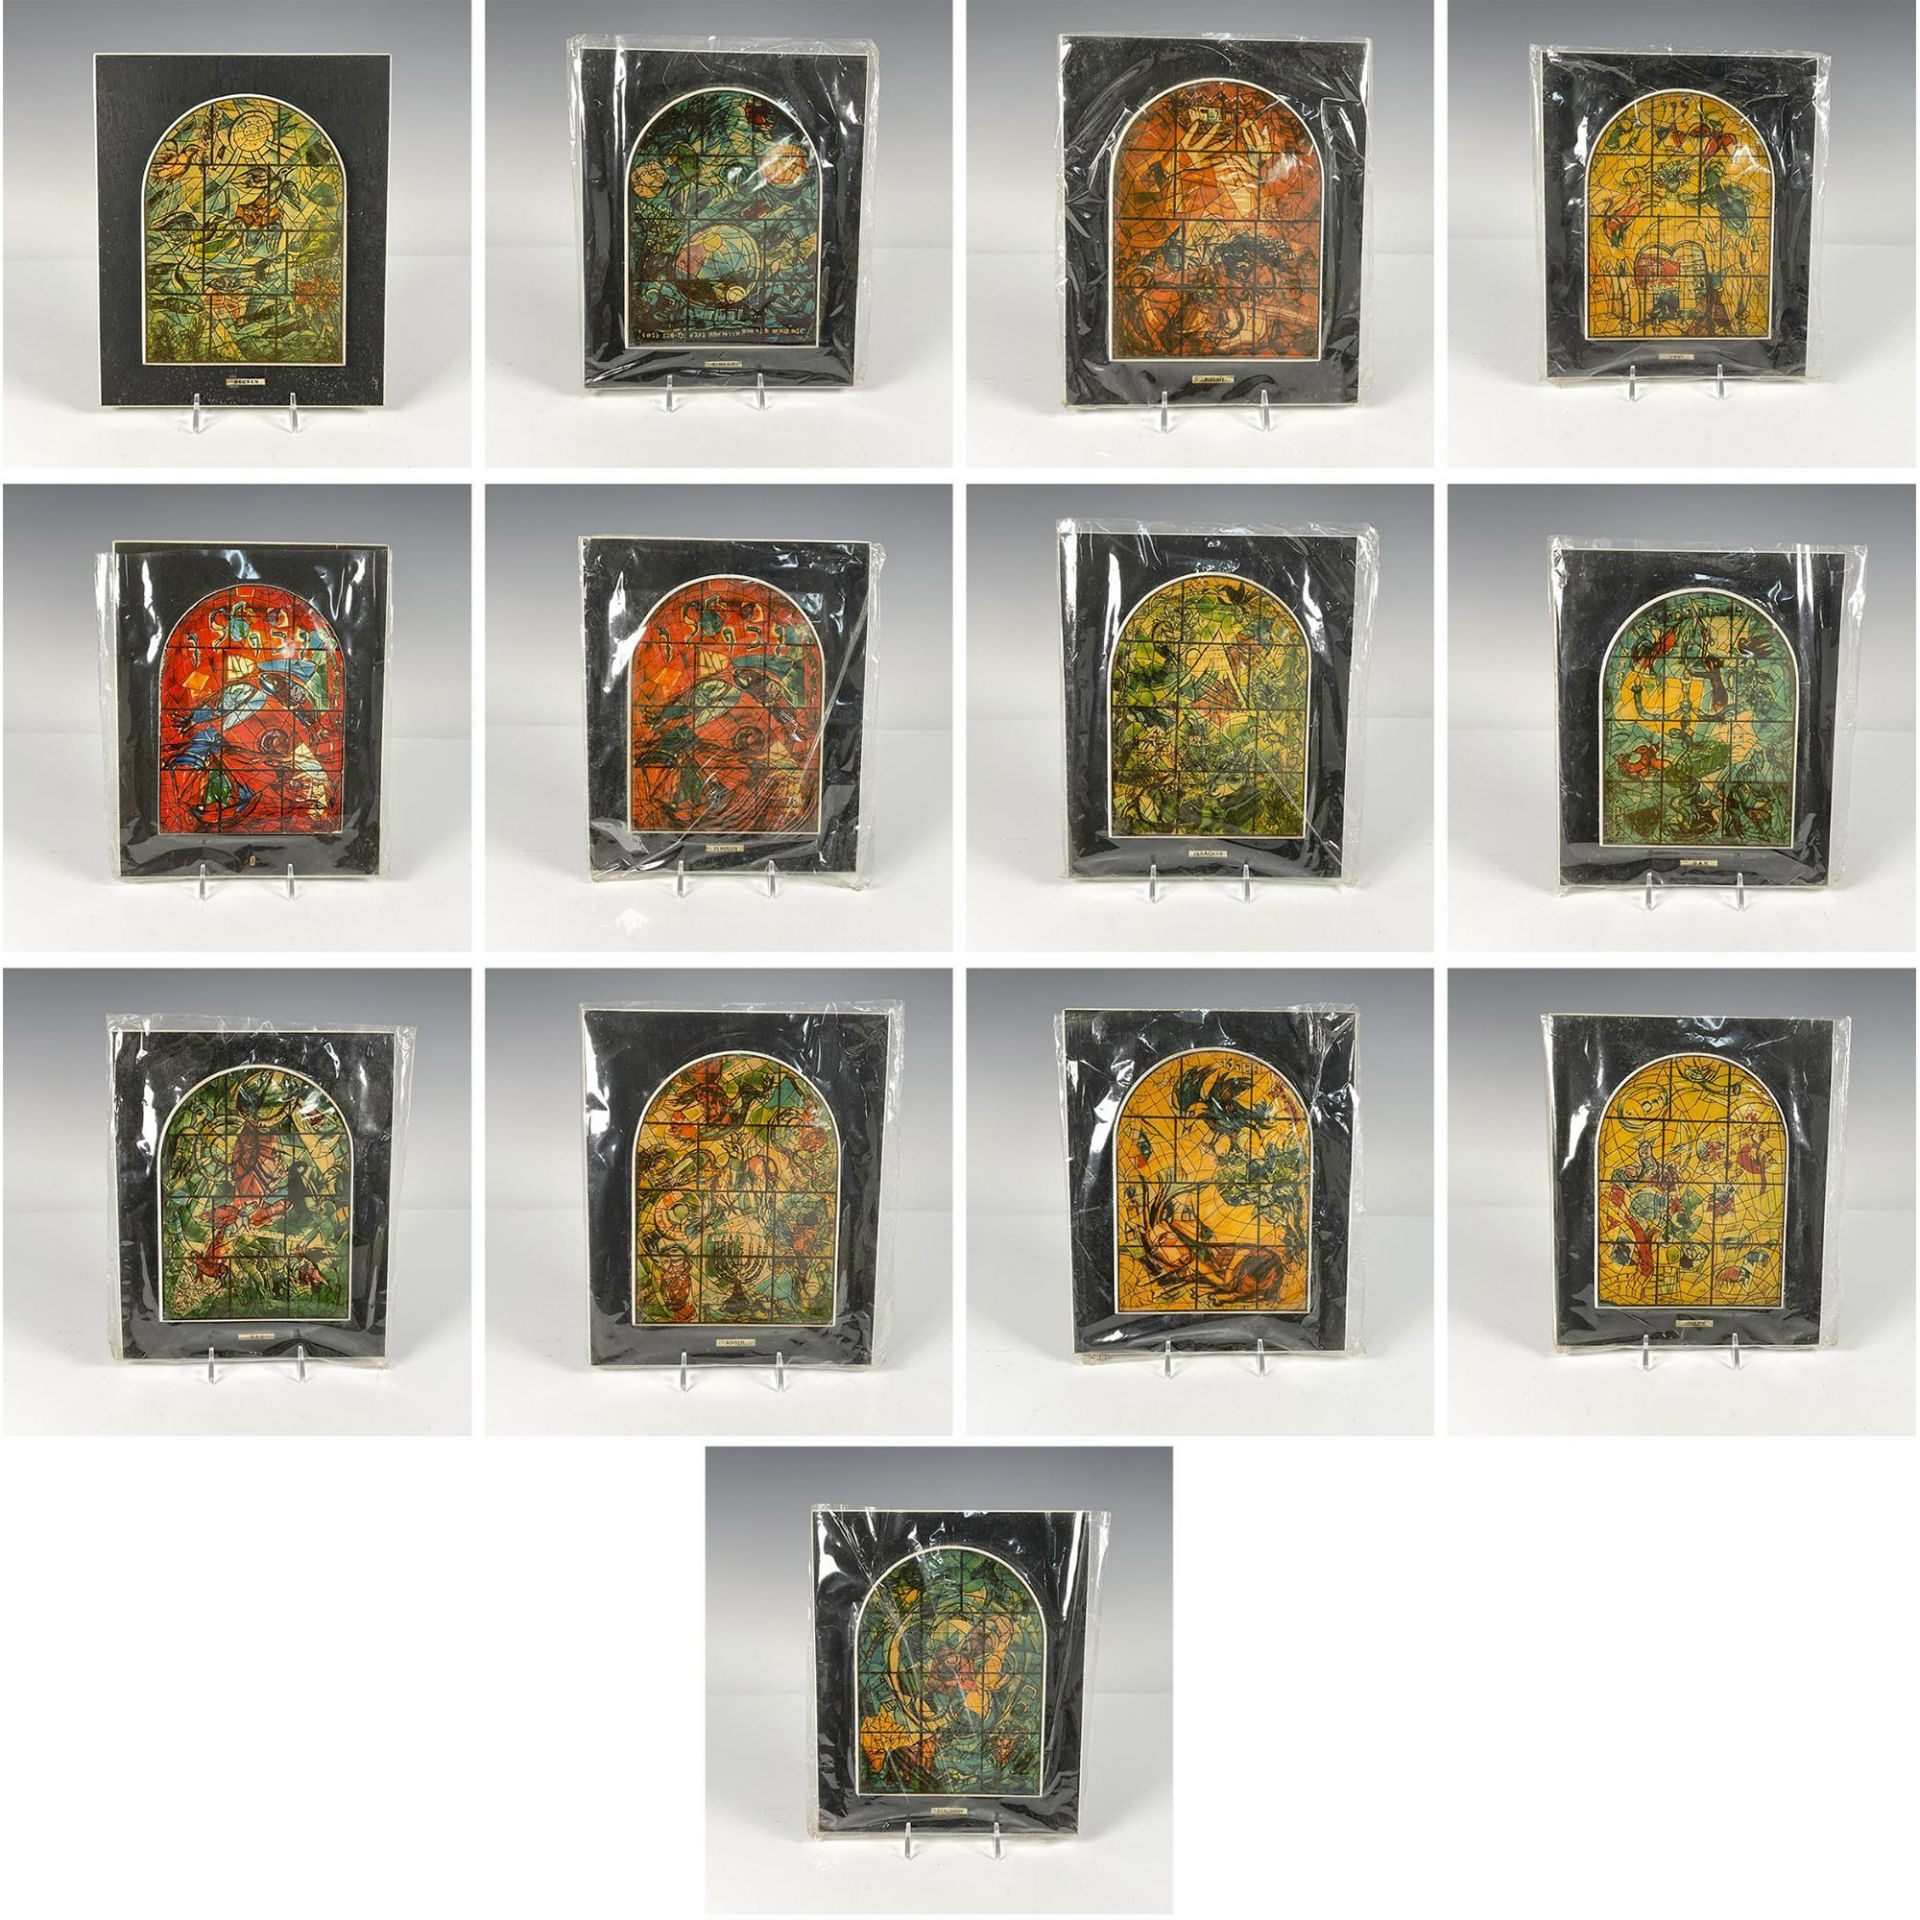 13pc After Marc Chagall by Avissar Wooden Plaques, The 12 Stained Glass Windows